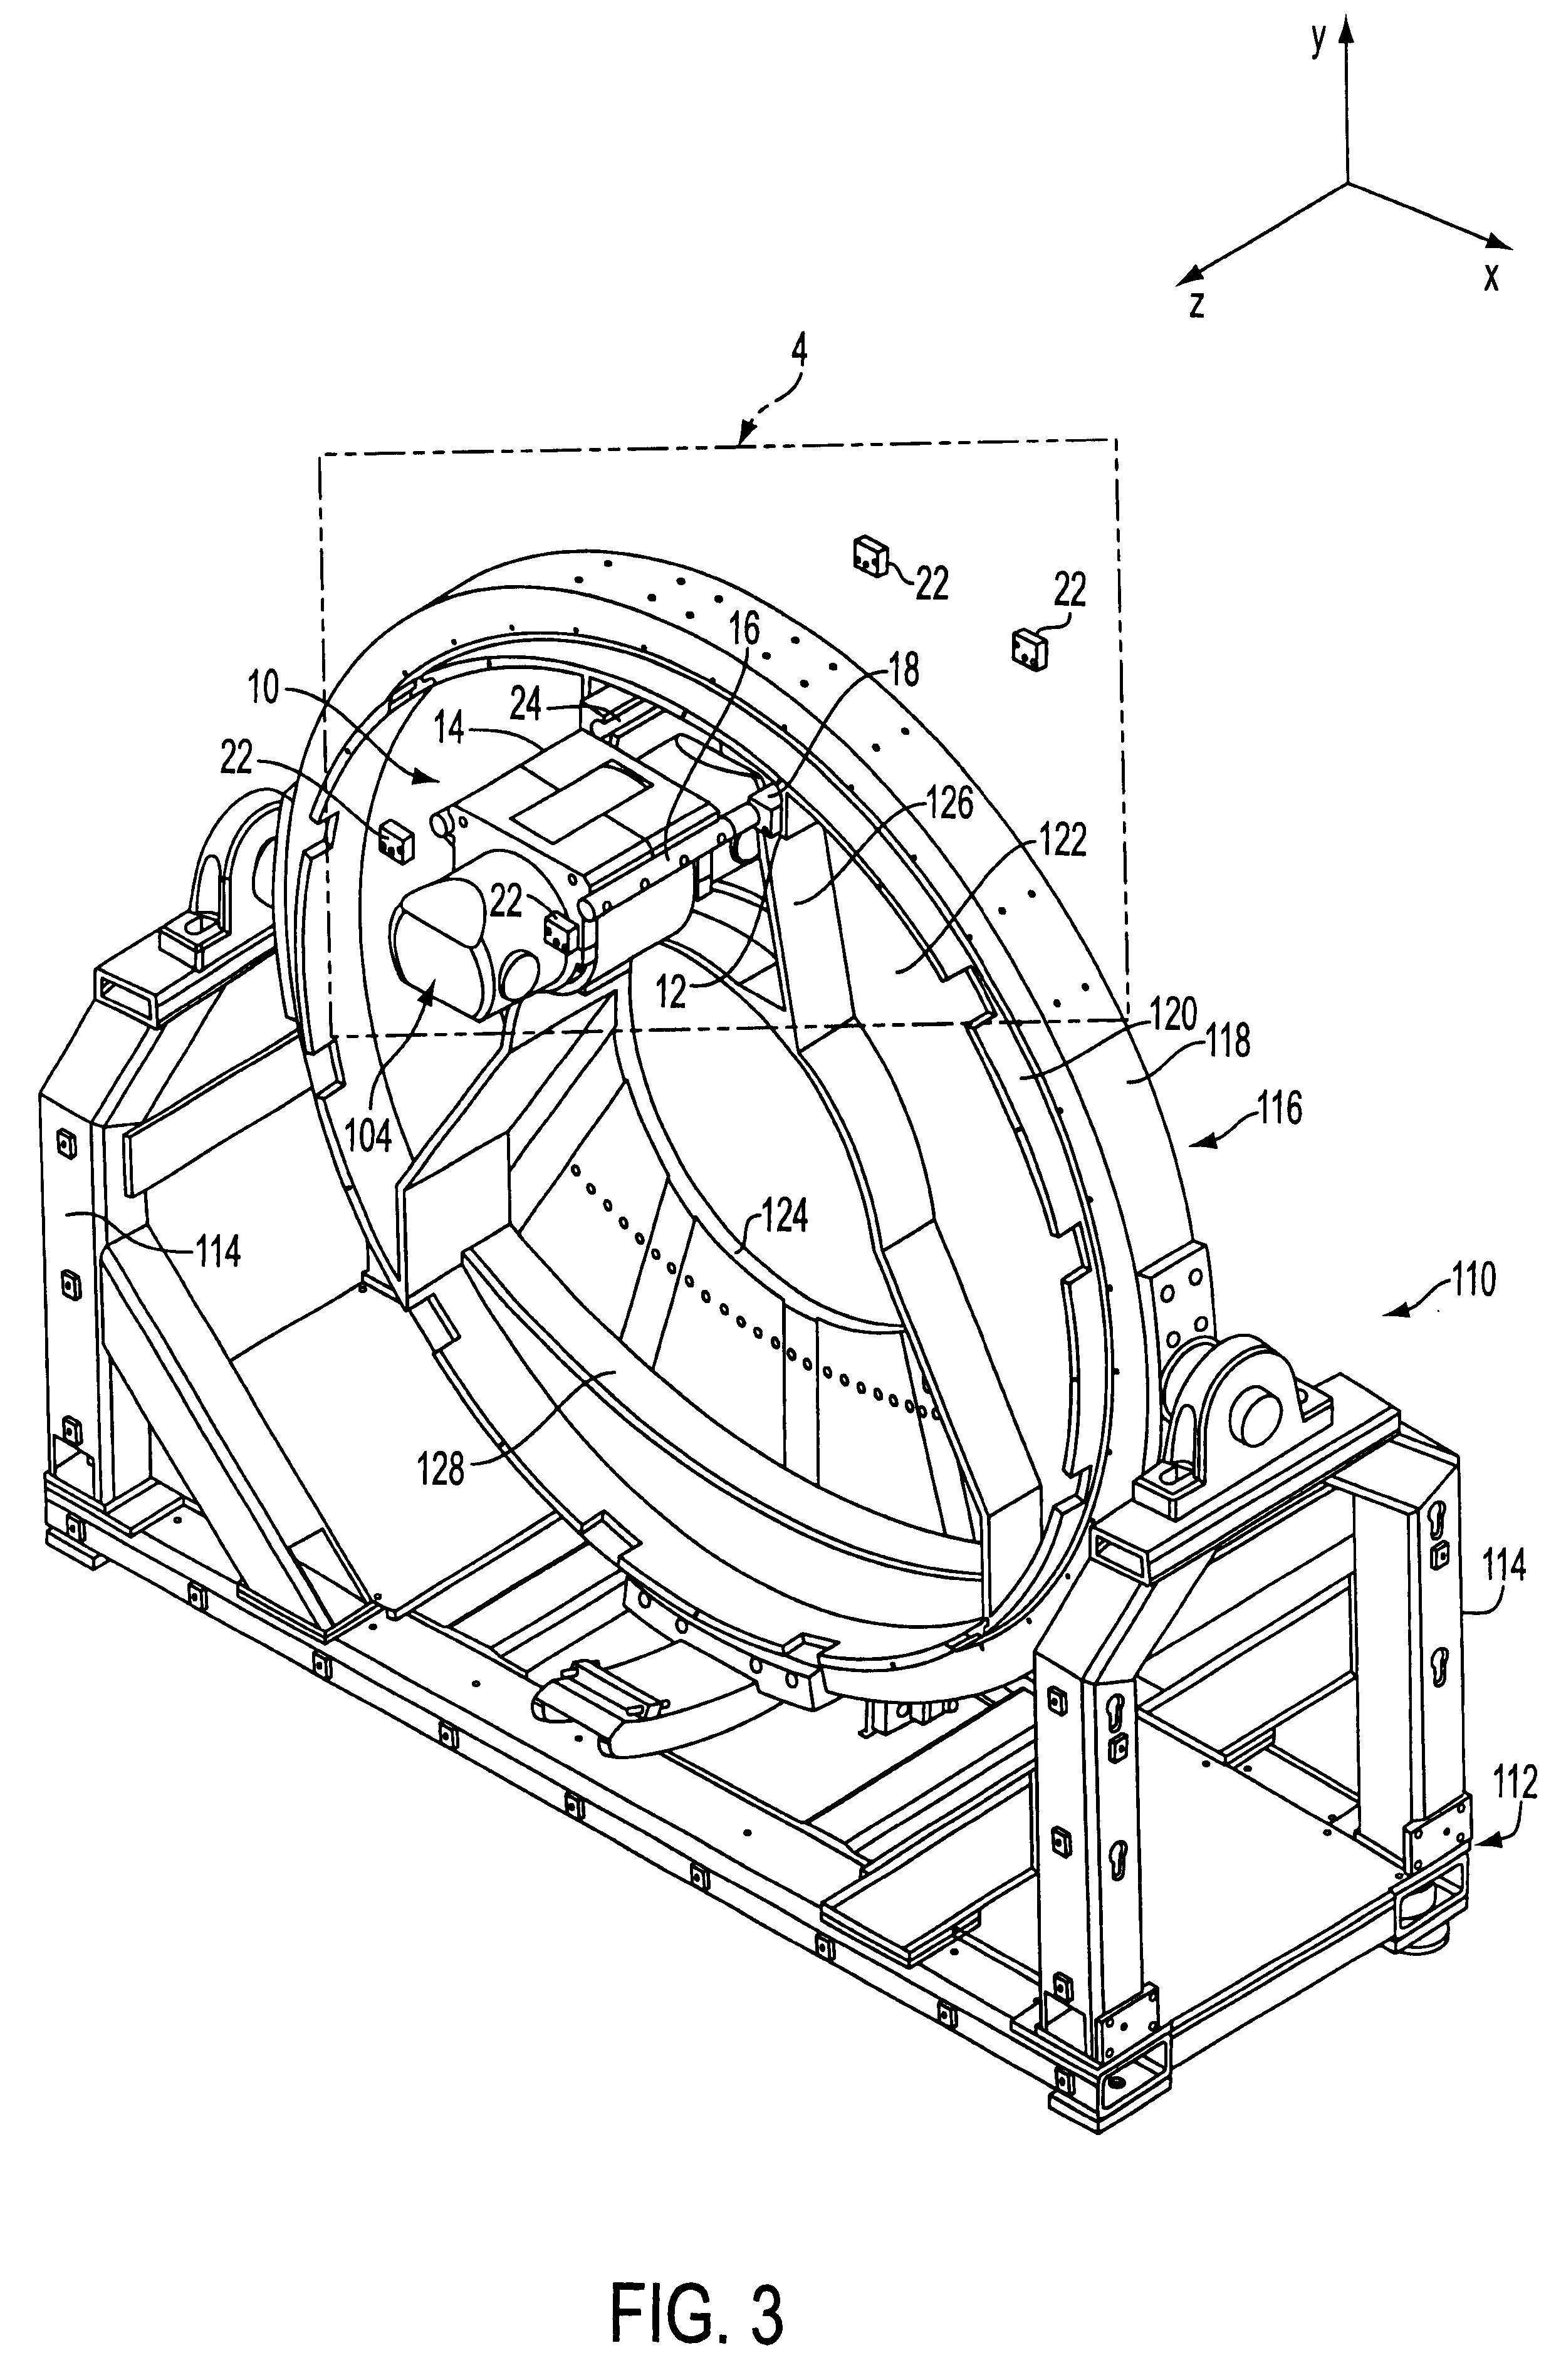 System and method for mounting x-ray tube in CT scanner